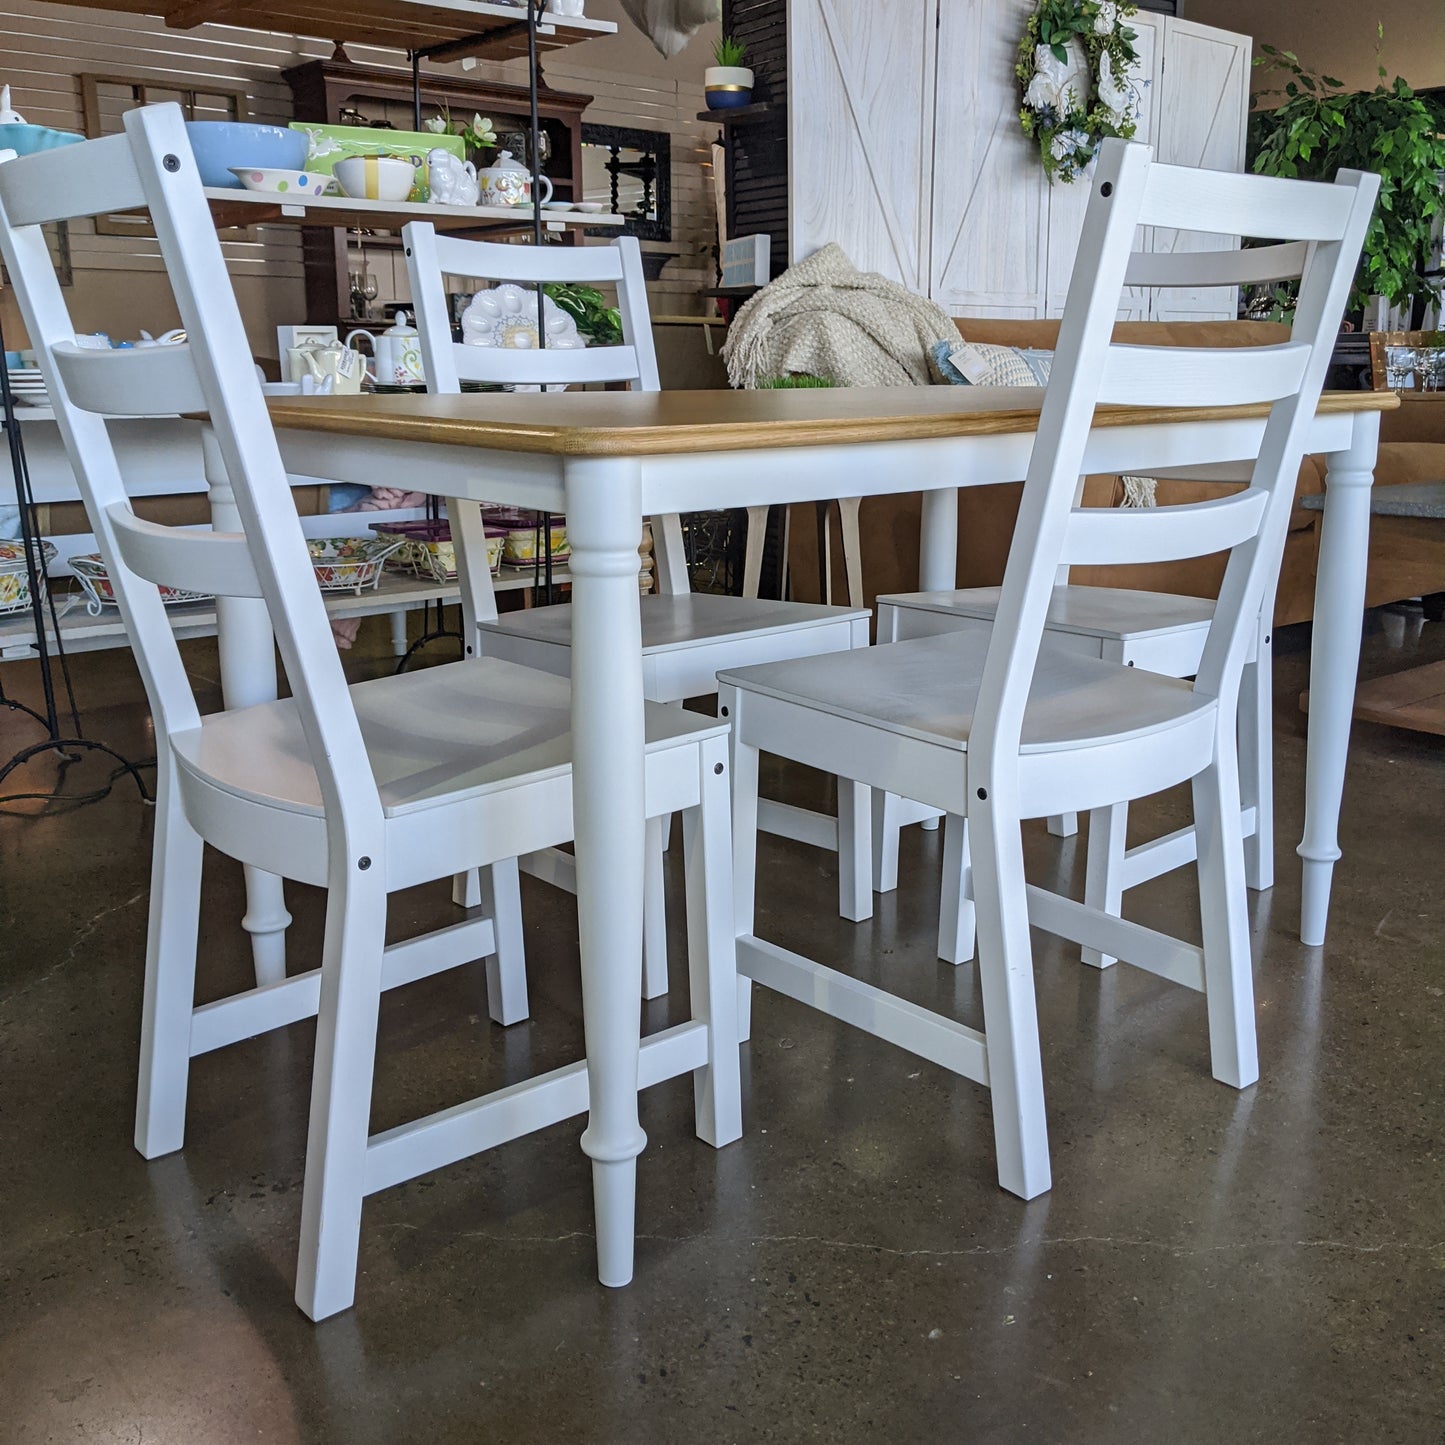 Wood top, white base table & 4 chairs